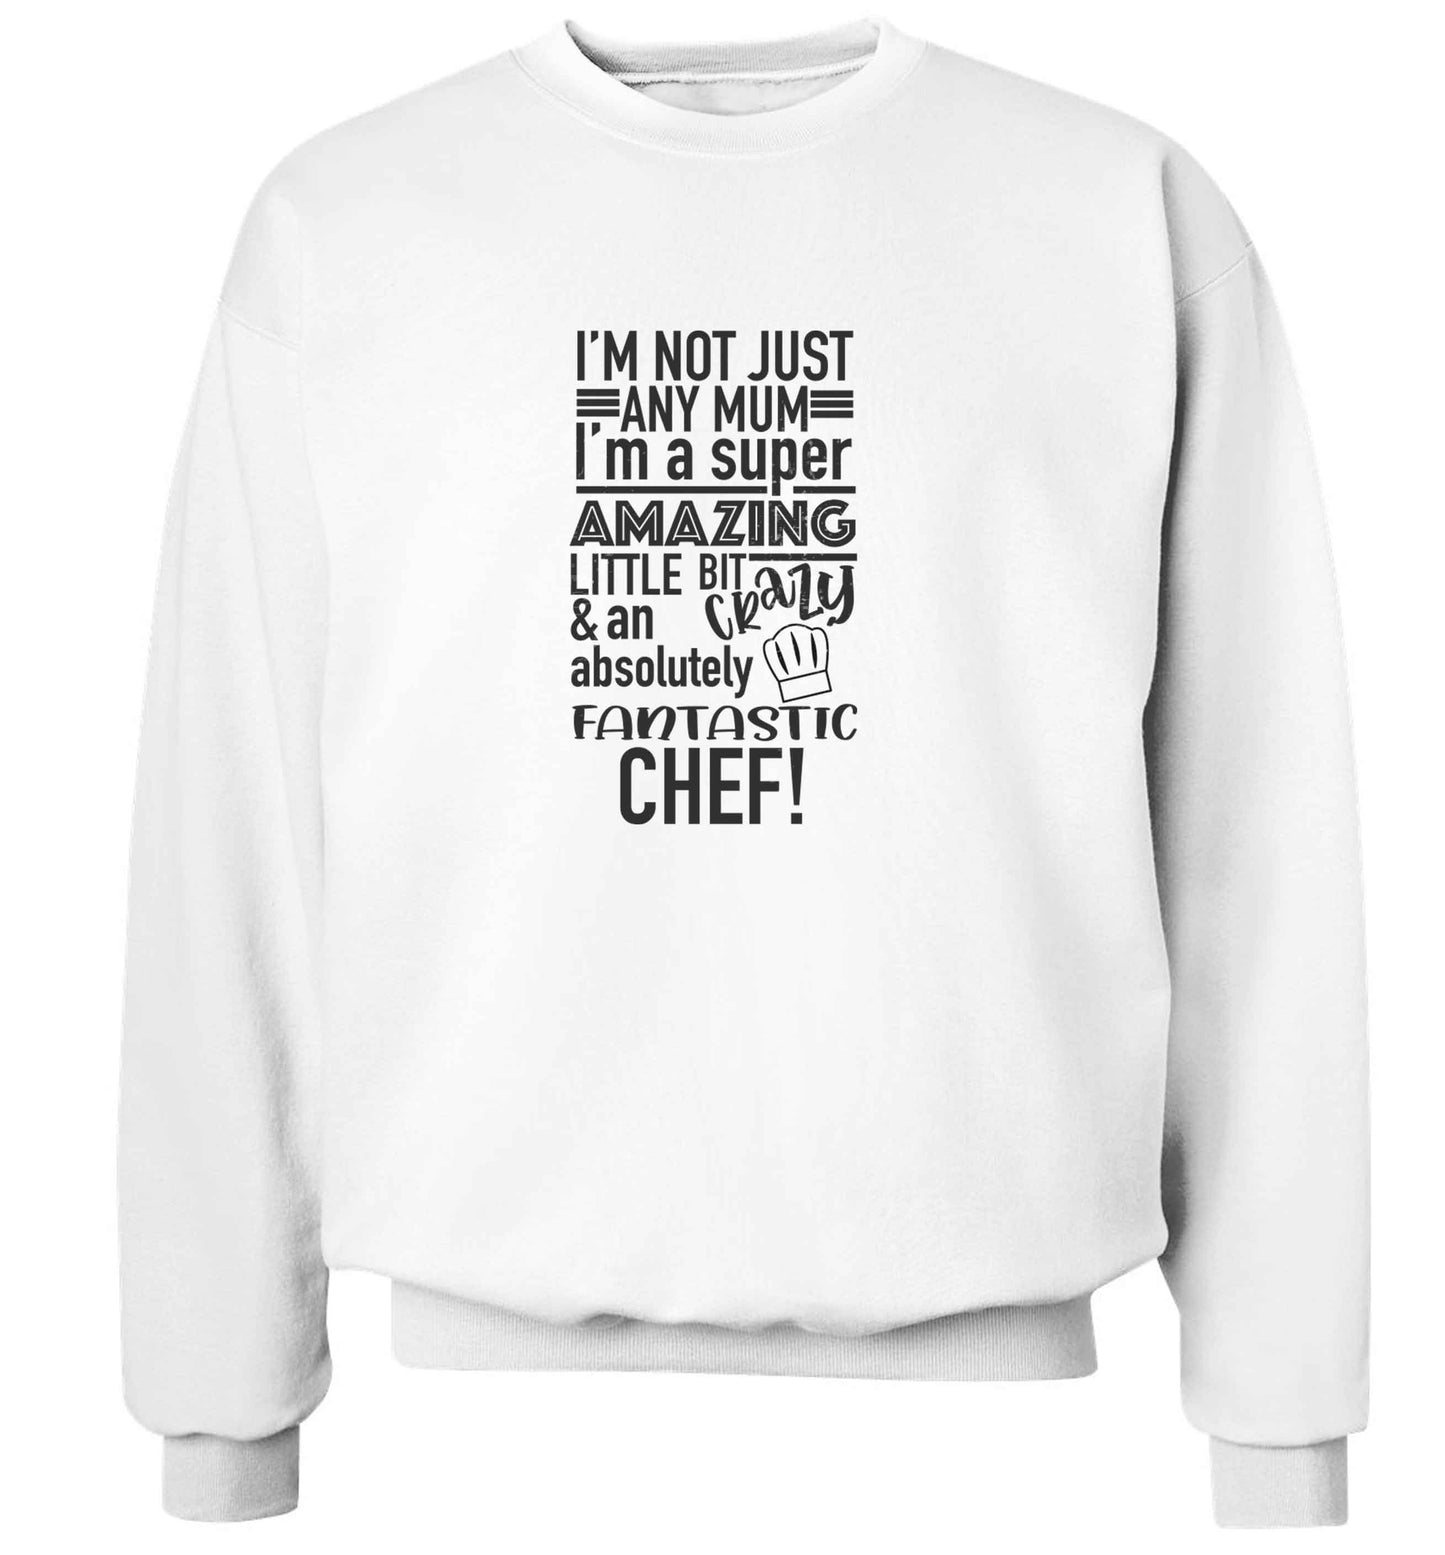 I'm not just any mum I'm a super amazing little bit crazy and an absolutely fantastic chef! adult's unisex white sweater 2XL